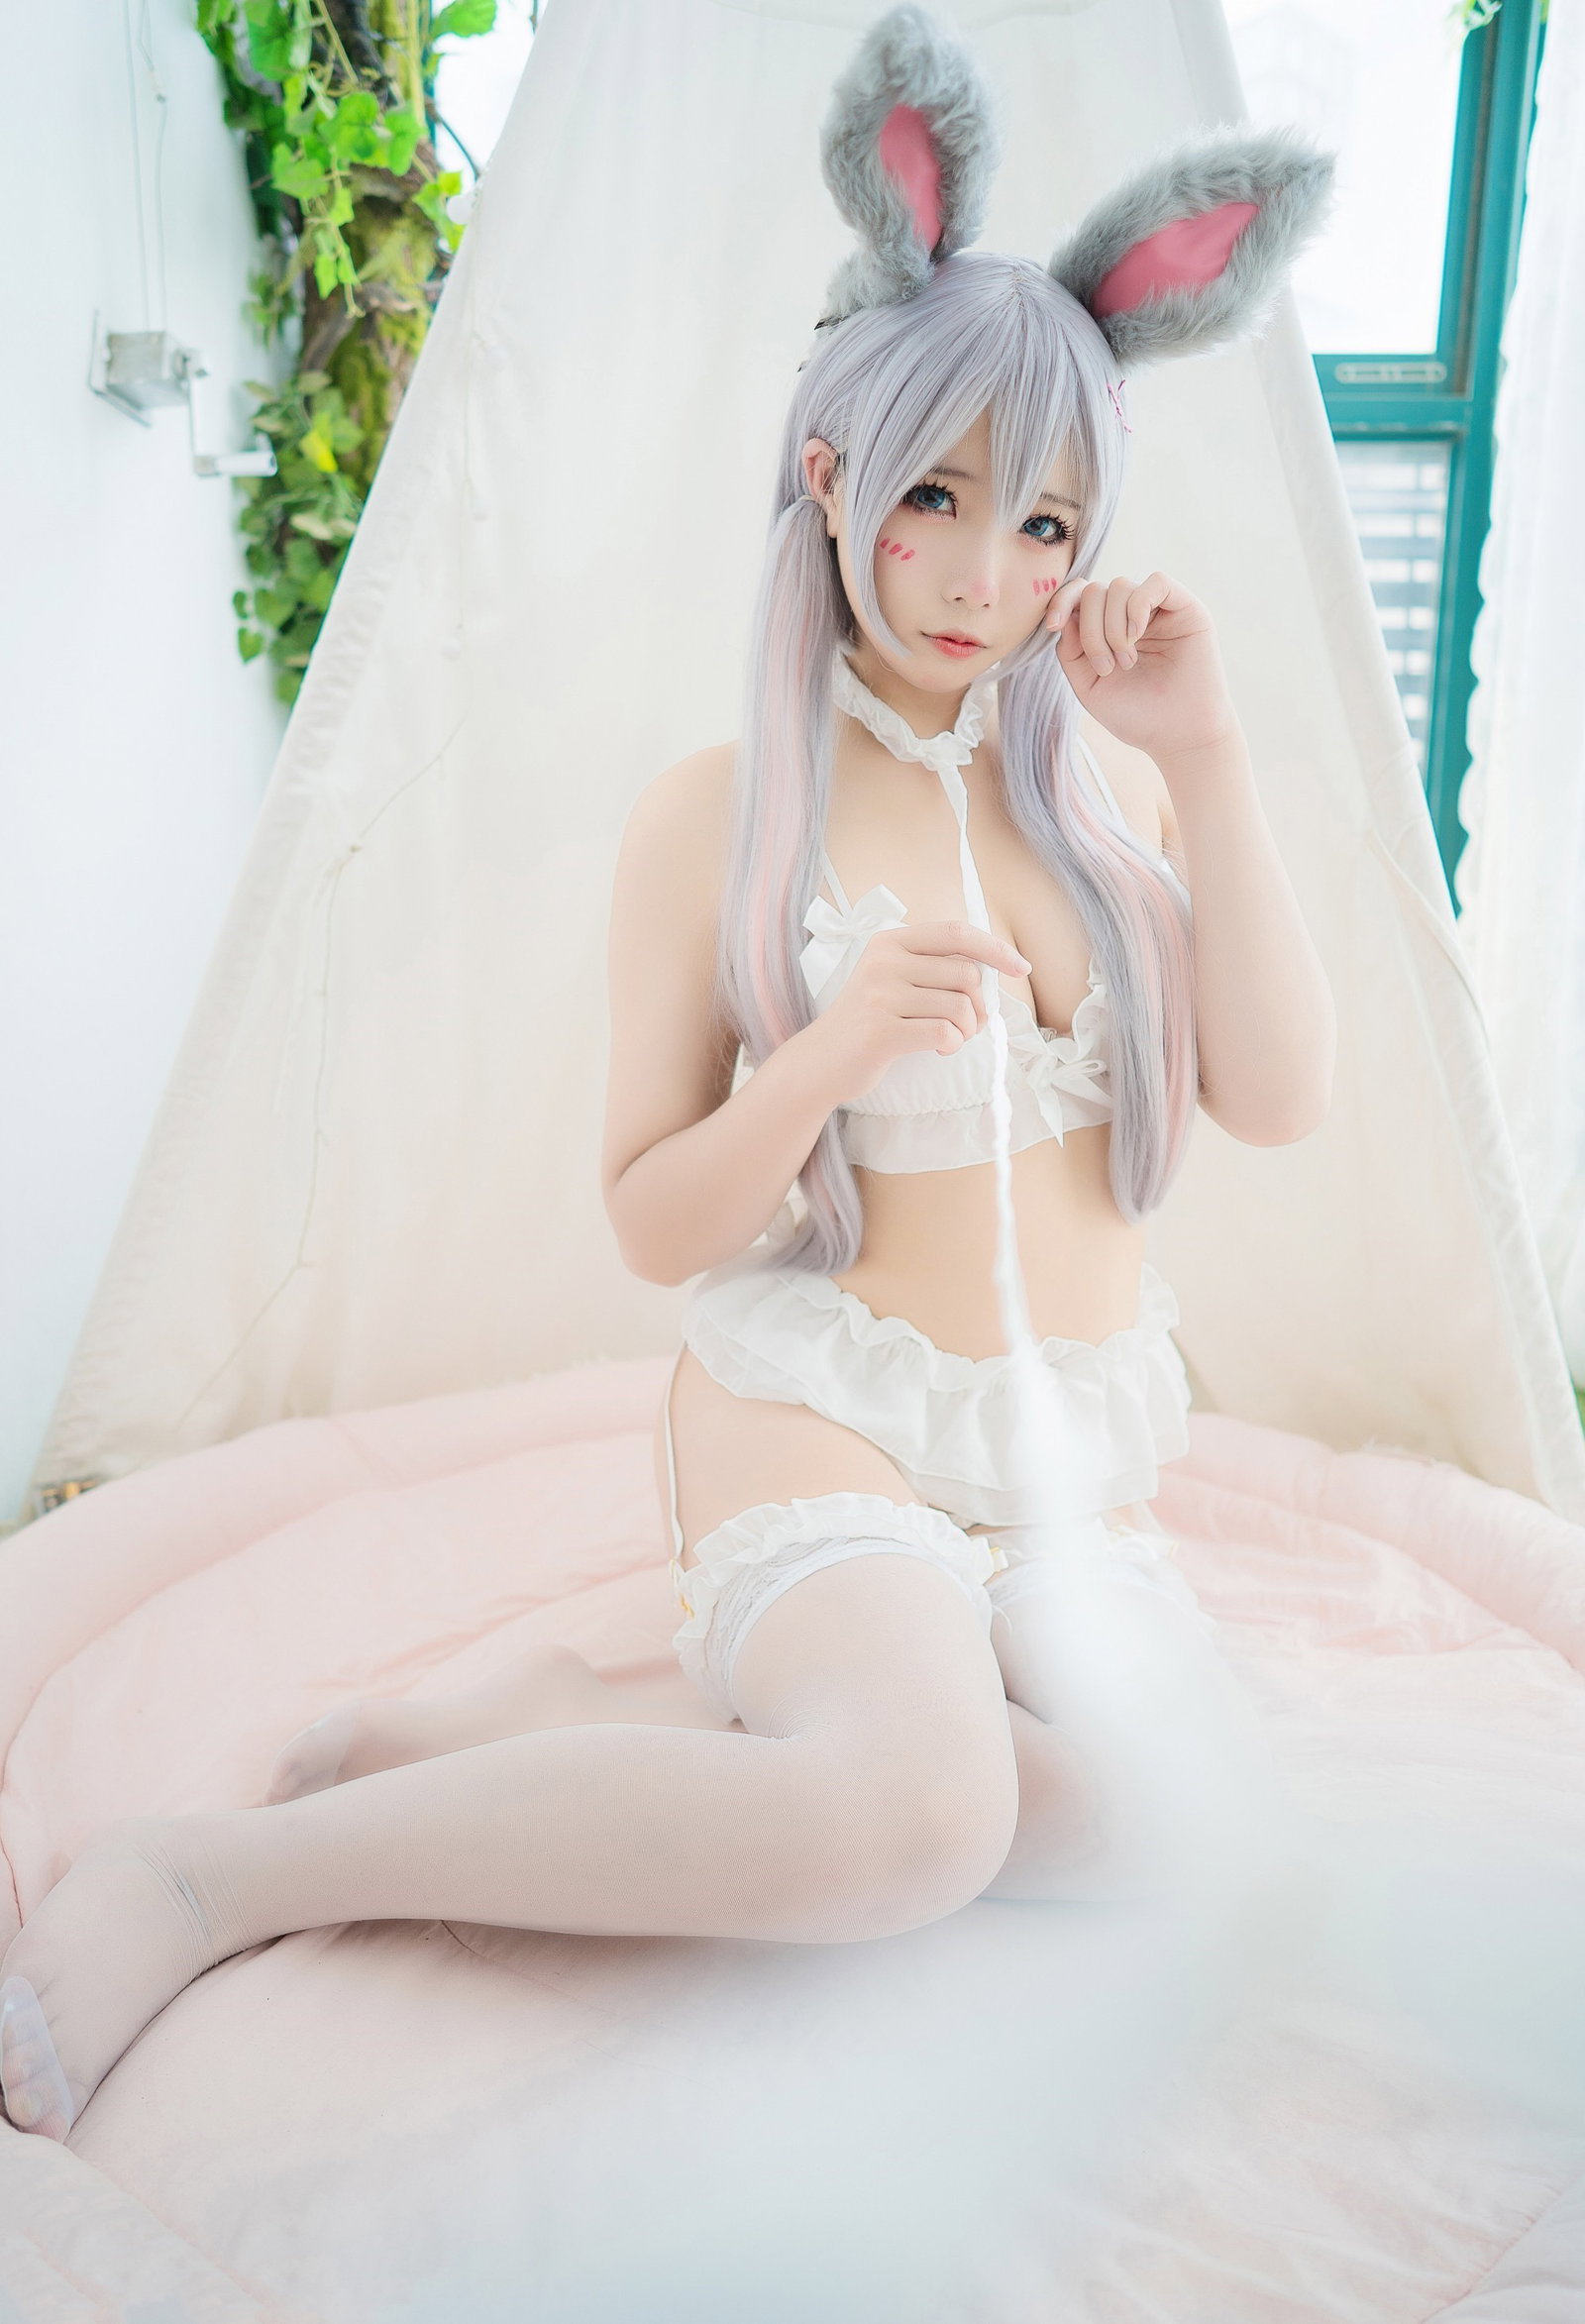 Photo by Babes Cosplay with the username @babescosplay,  December 18, 2020 at 12:45 AM. The post is about the topic Sexy Cosplay and the text says 'Bunny~'